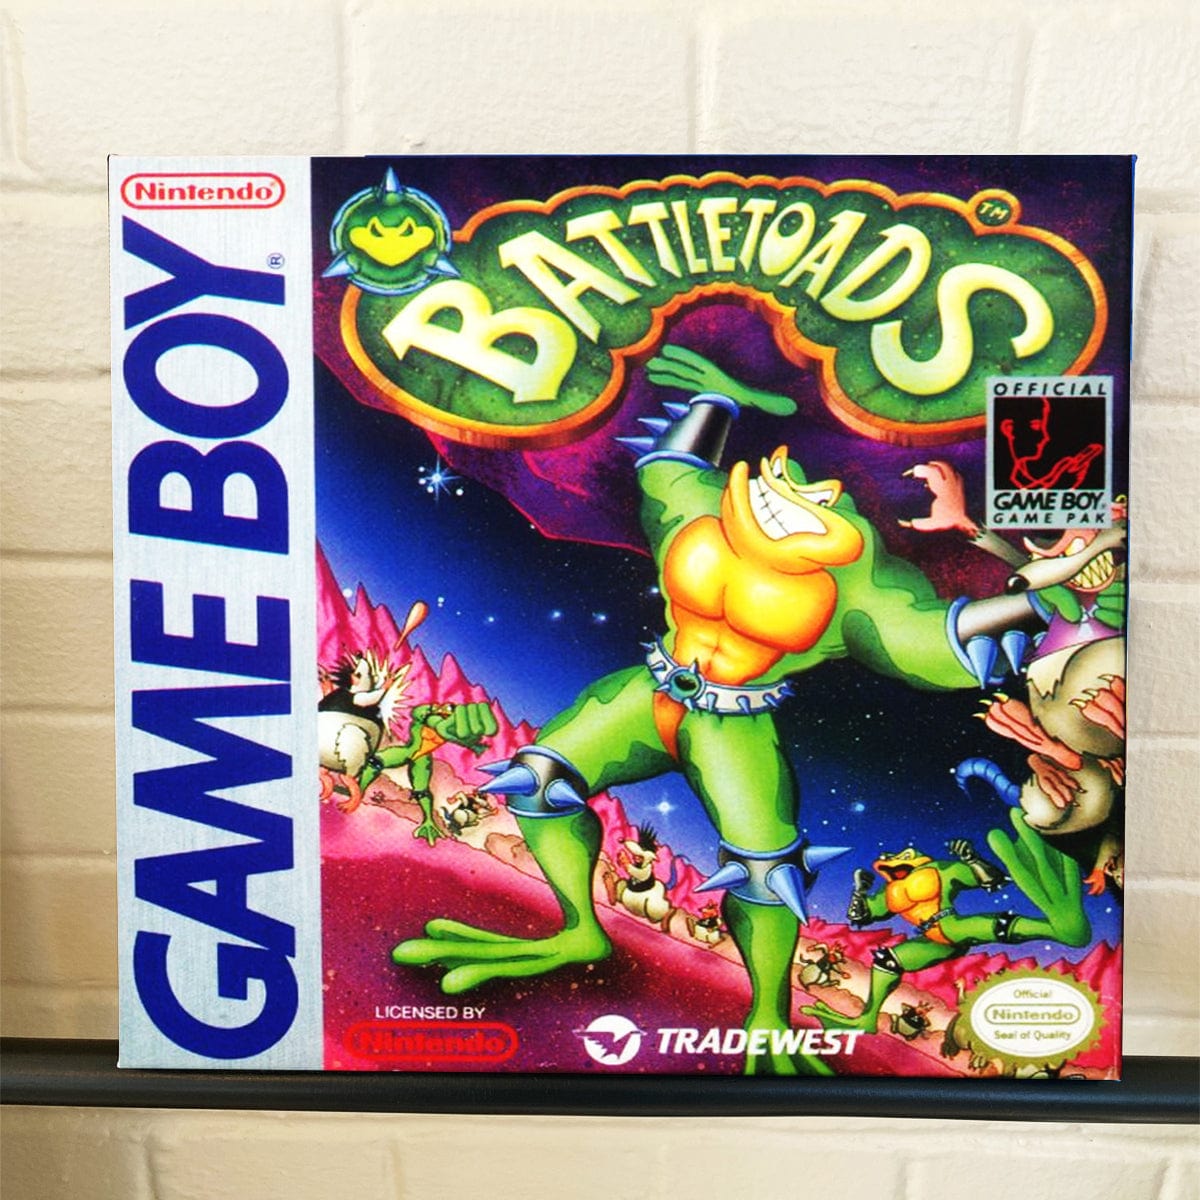 Battletoads Nintendo Gameboy Cover Gallery Wrapped Canvas 12x12